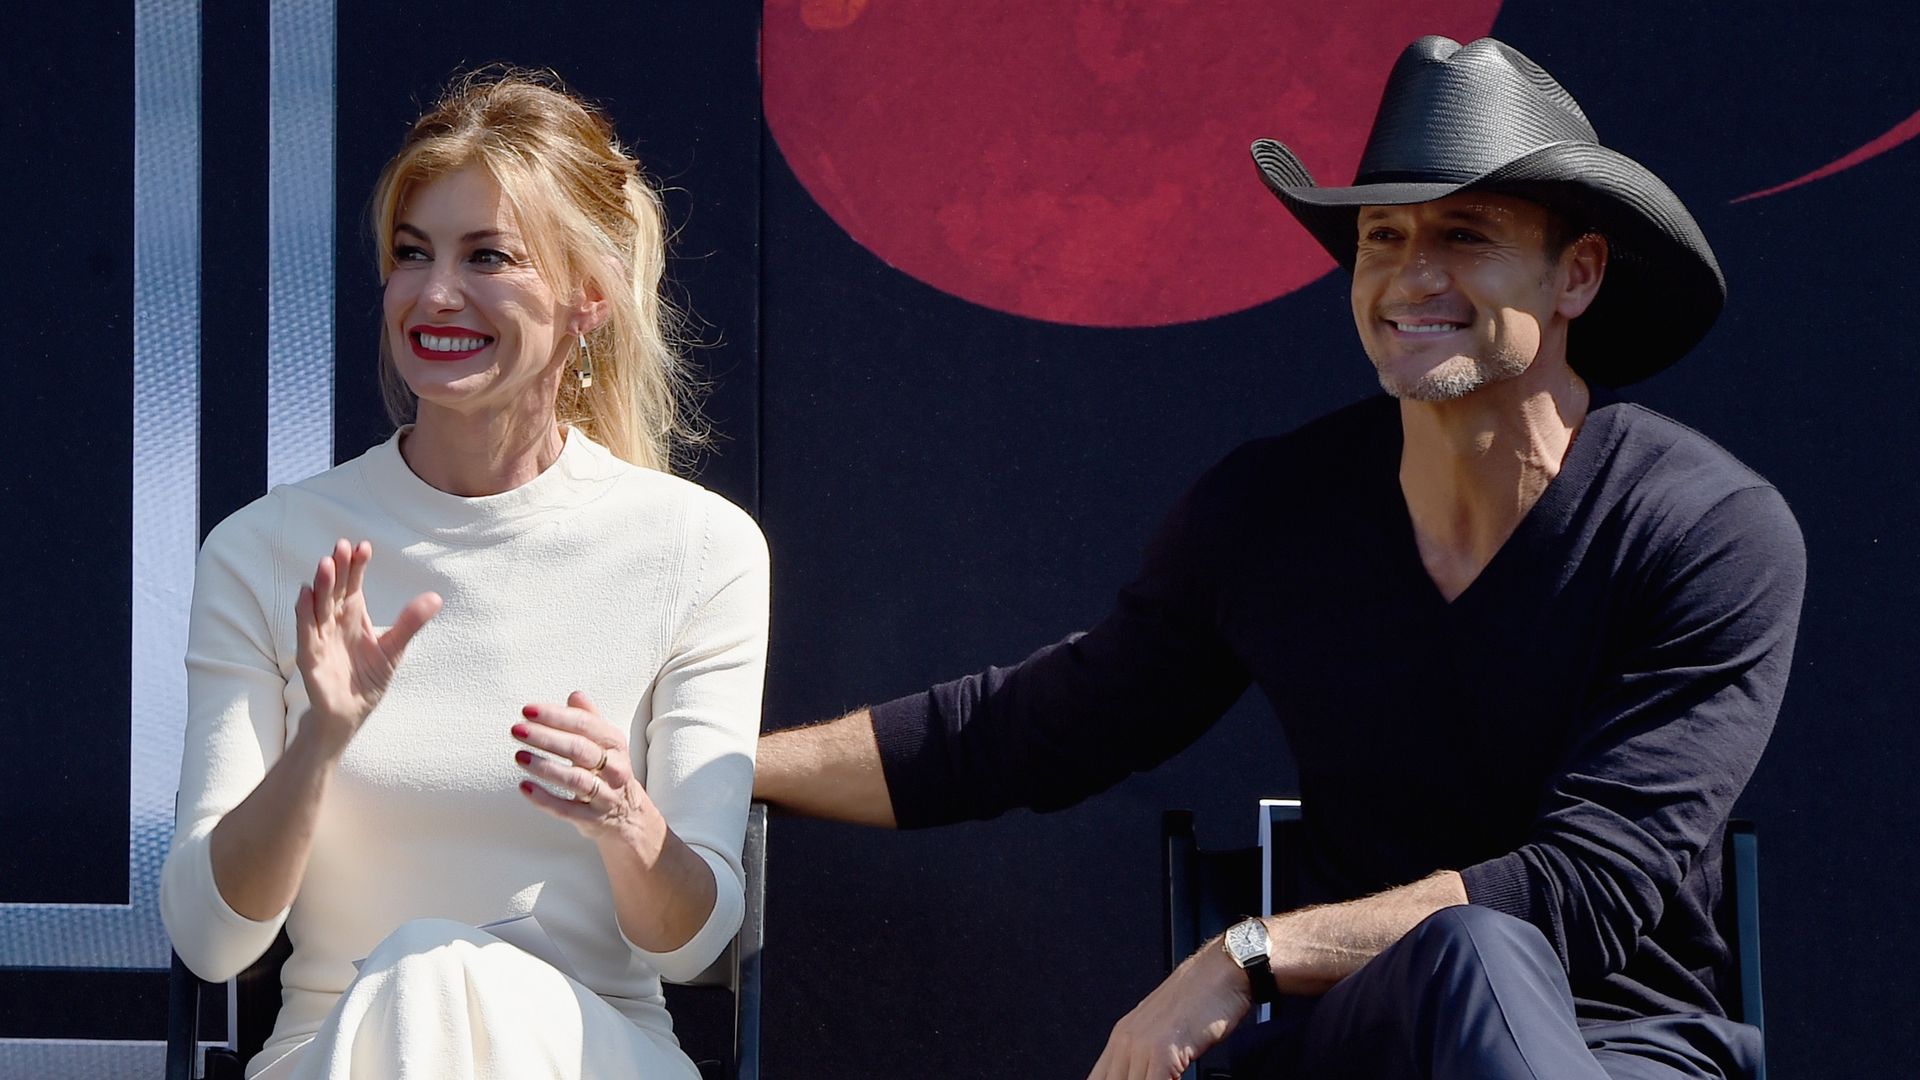 Honorees Faith Hill And Tim McGraw during the Nashville Music City Walk Of Fame Induction Ceremony at Nashville Music City Walk of Fame on October 5, 2016